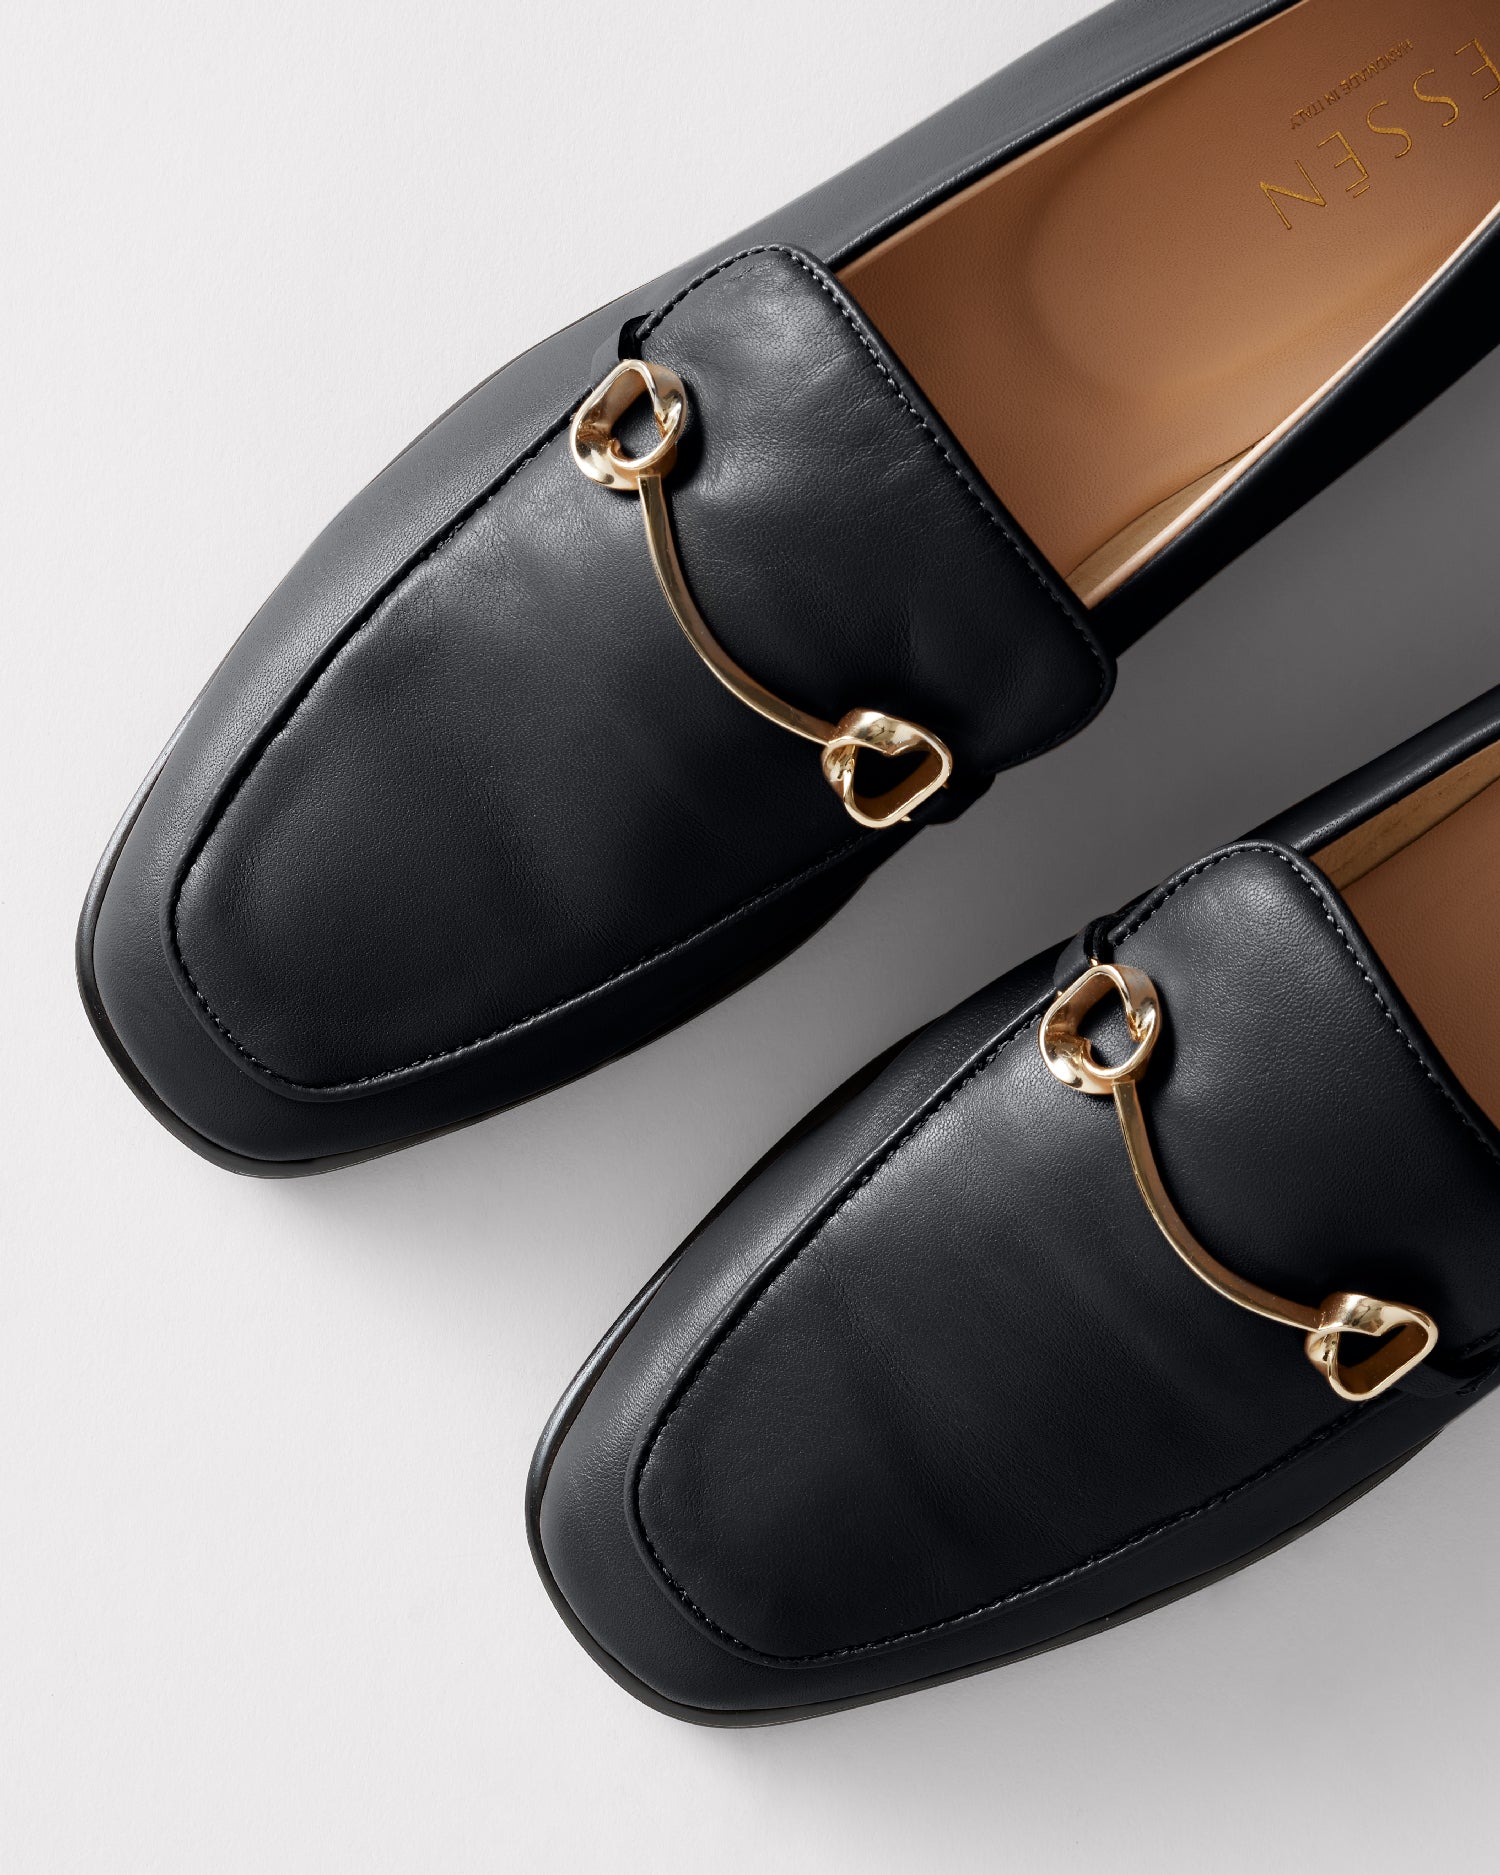 The Modern Moccasin - Black With Hardware